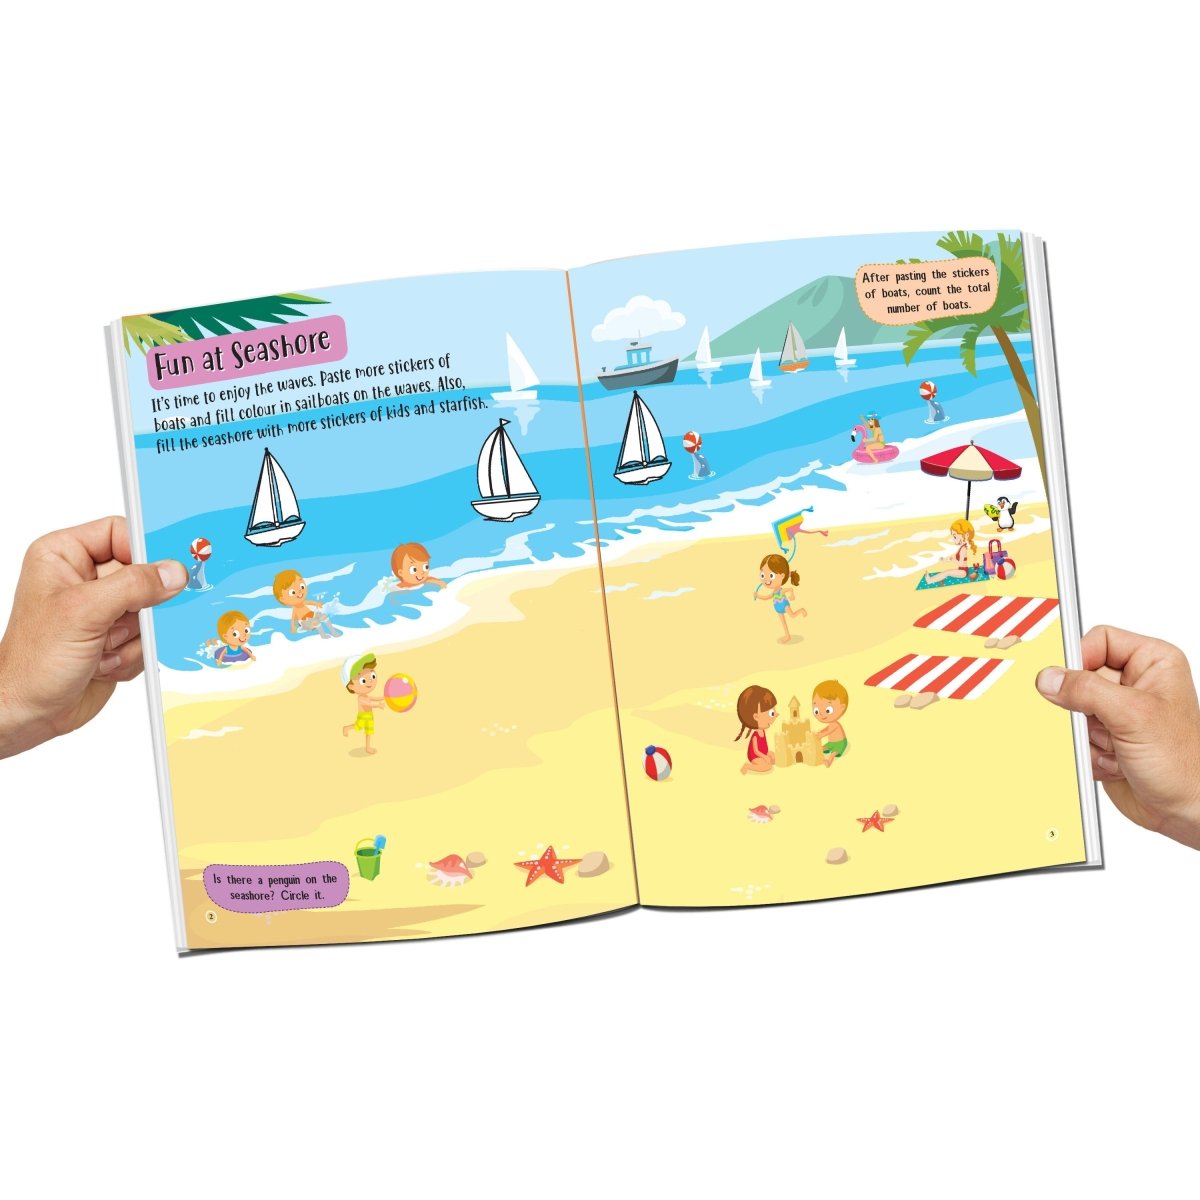 Dreamland Publications 555 Stickers And Activity Books Pack (Pack of 2 Books) - 9789395588911